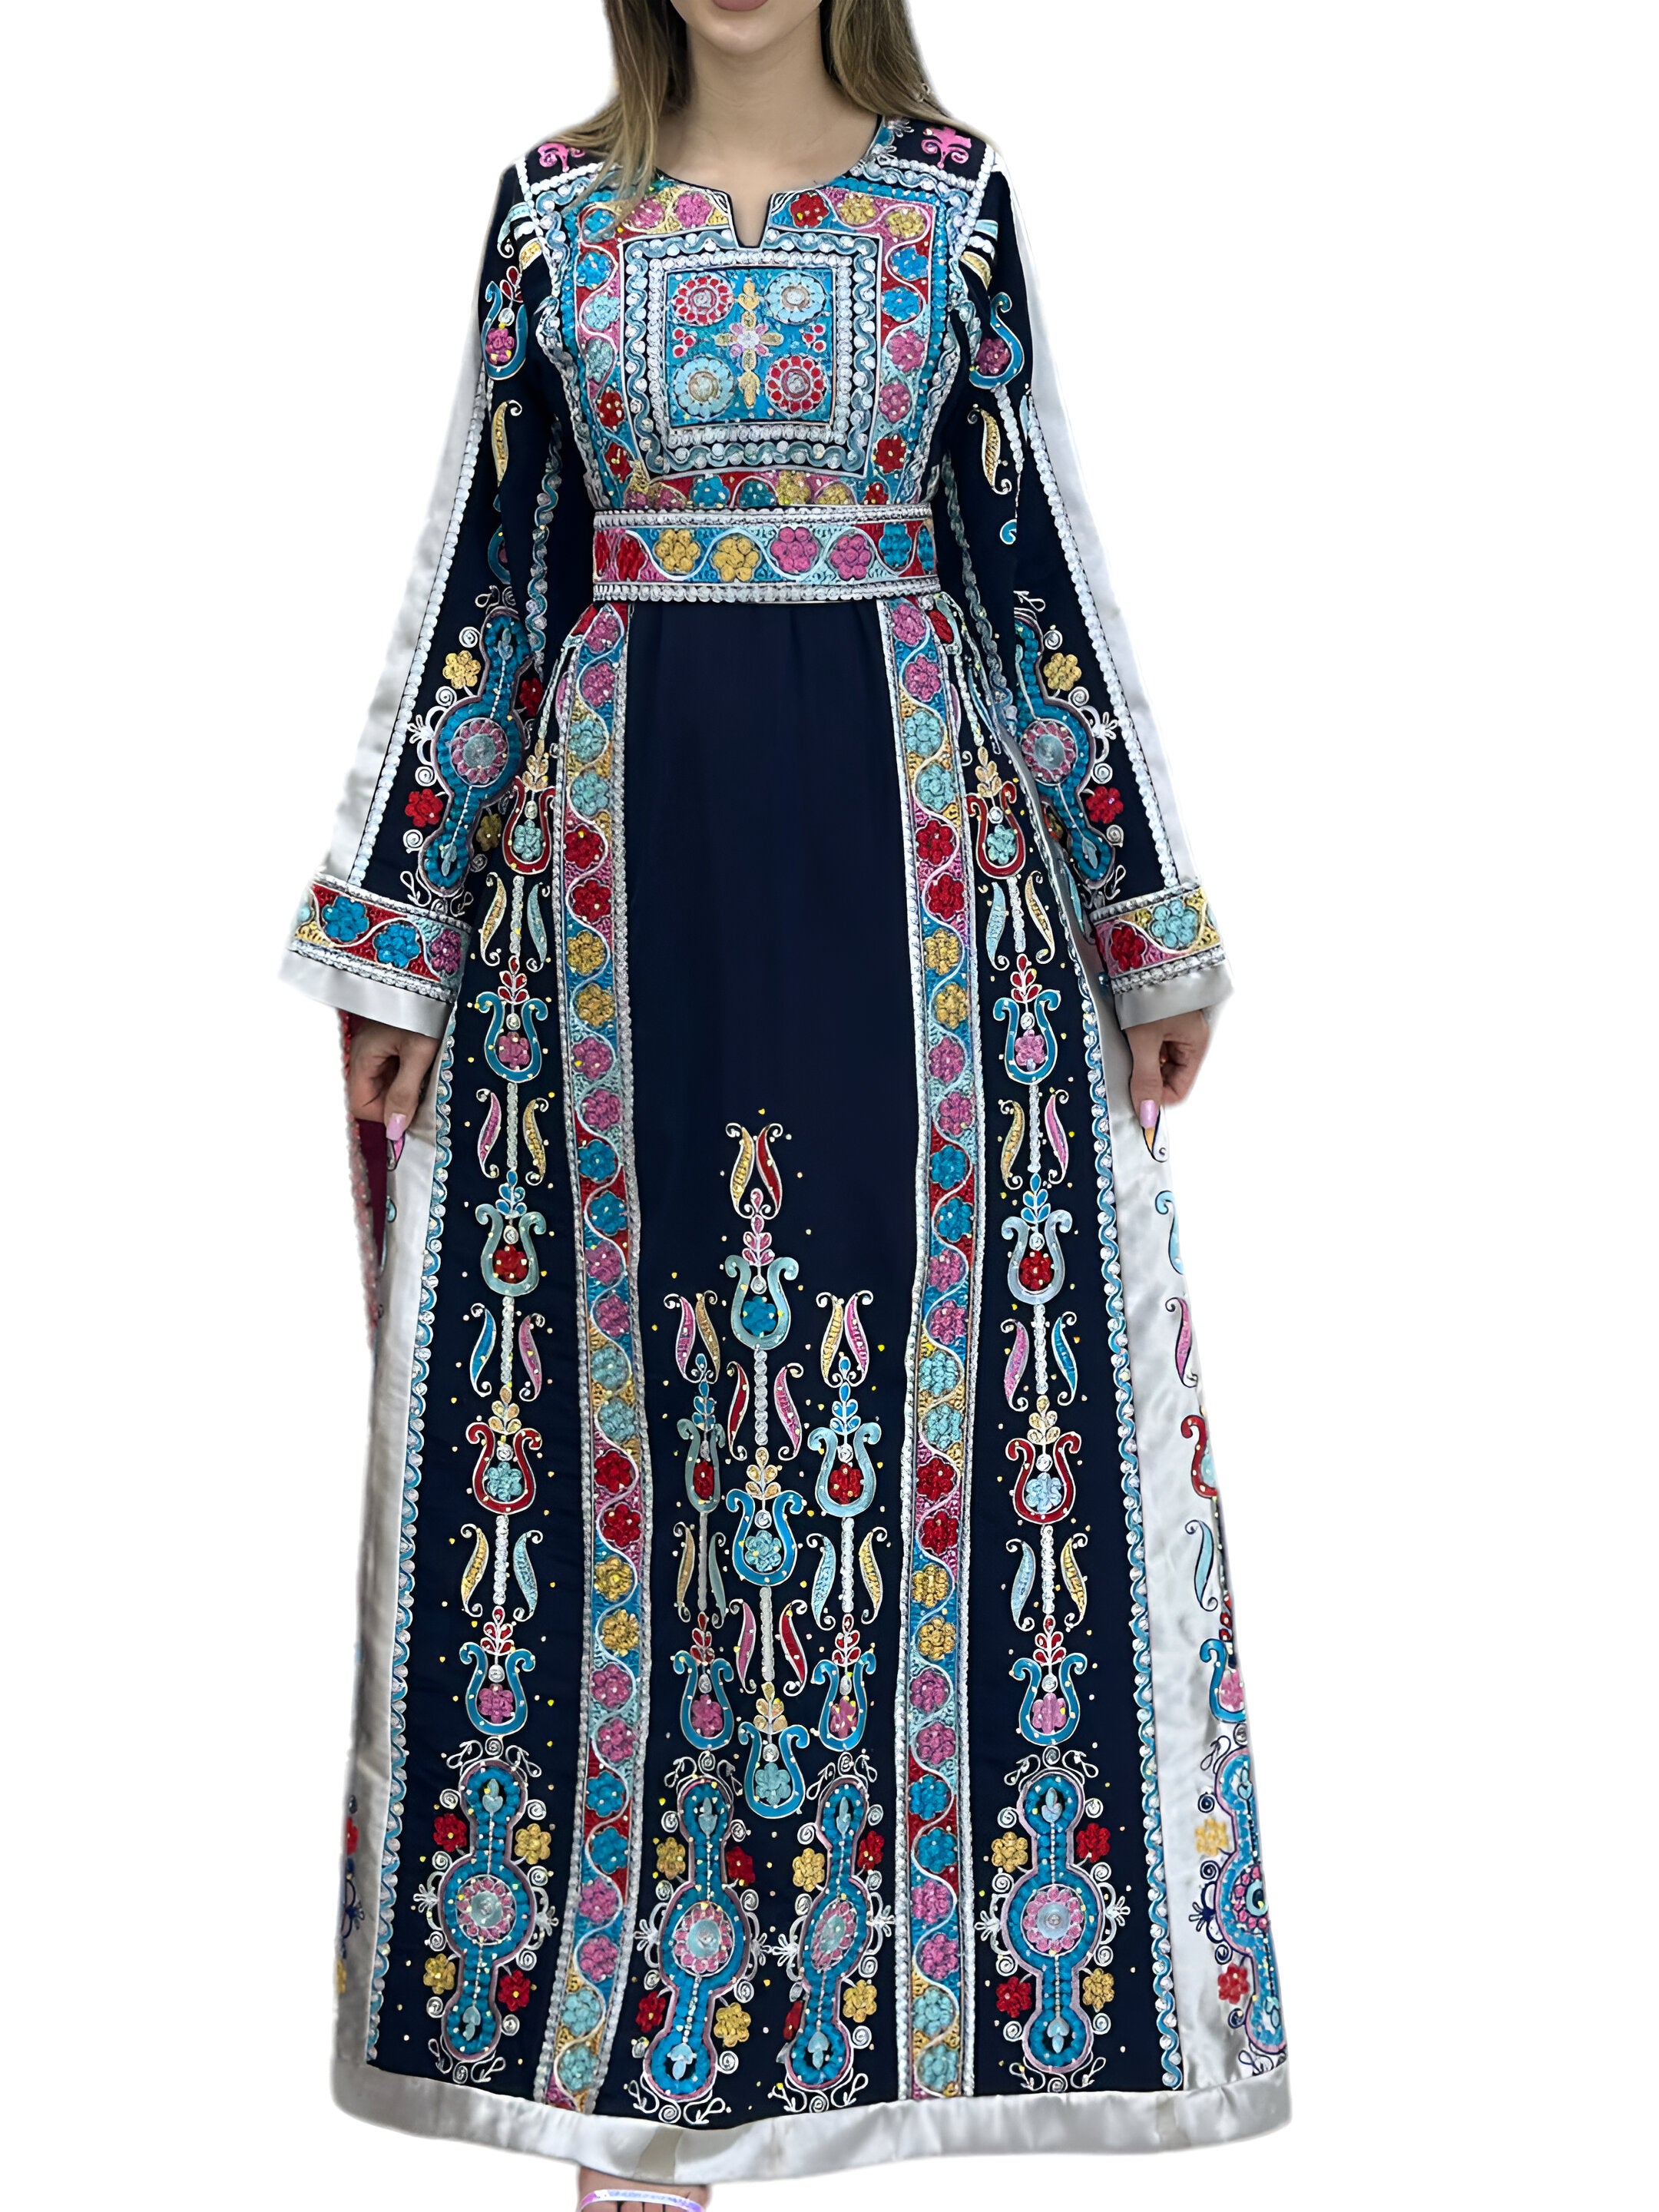 Palestinian Beauty - Very High Quality Traditional Embroidered Palestinian Thobe